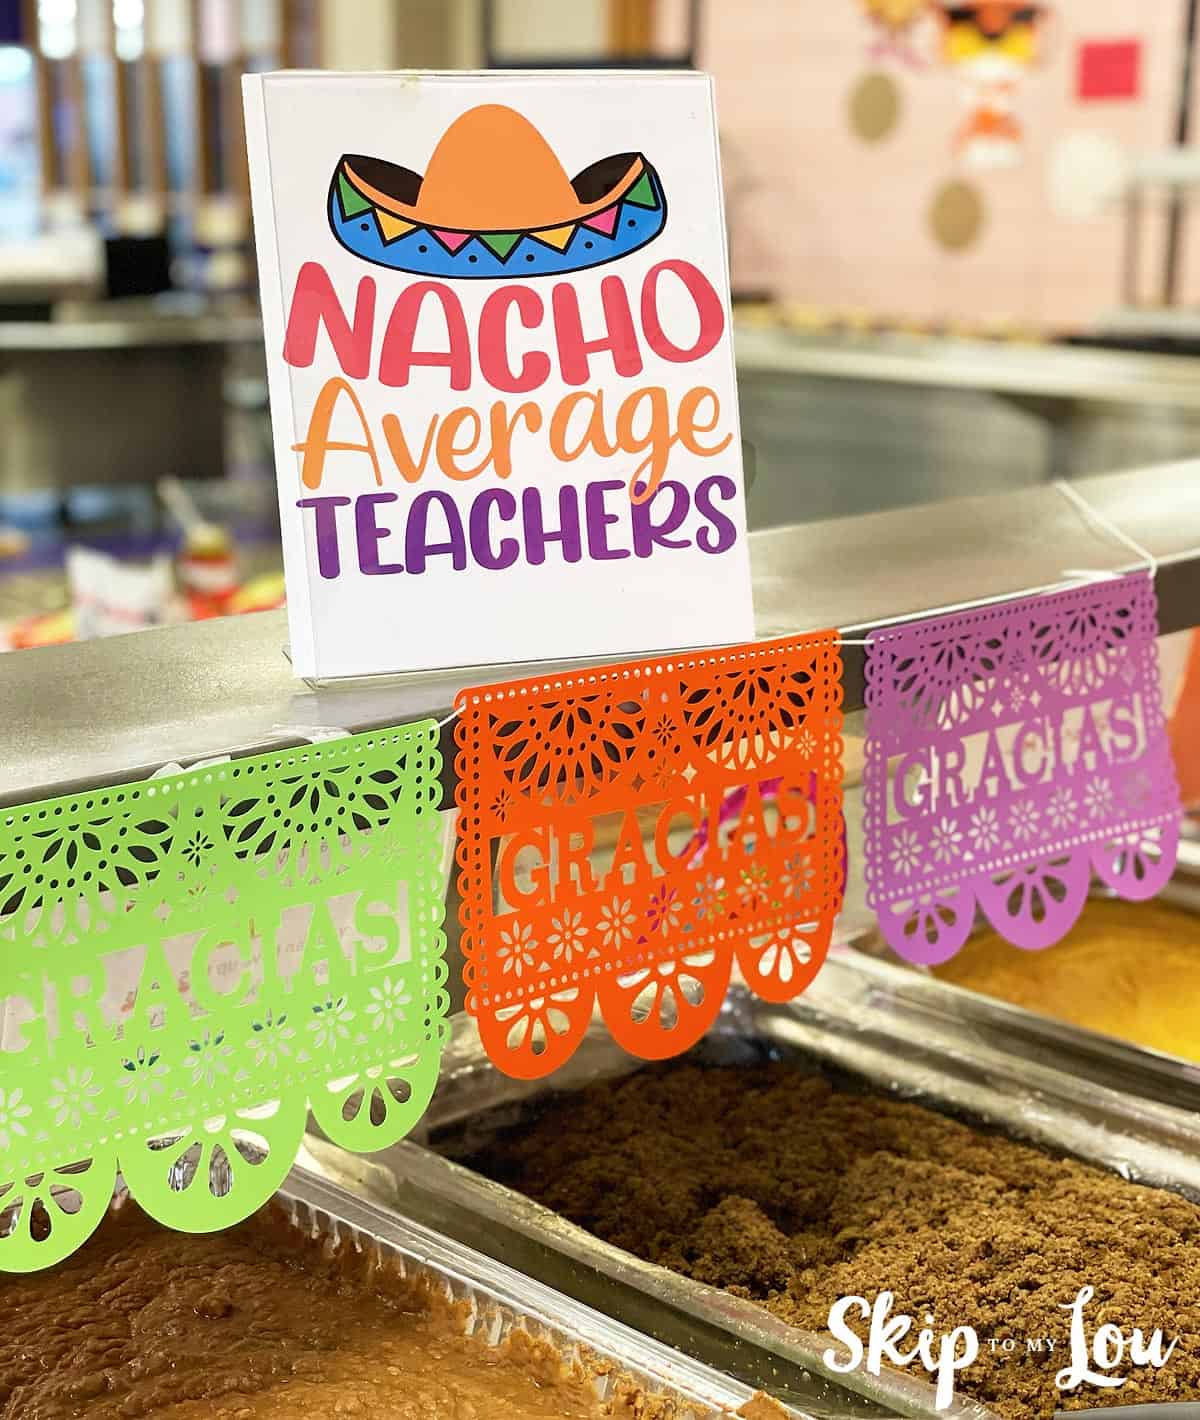 Papel picado banner that says "Gracias" in green, orange and purple for Teacher appreciation week. The card on top reads Nacho Average Teachers